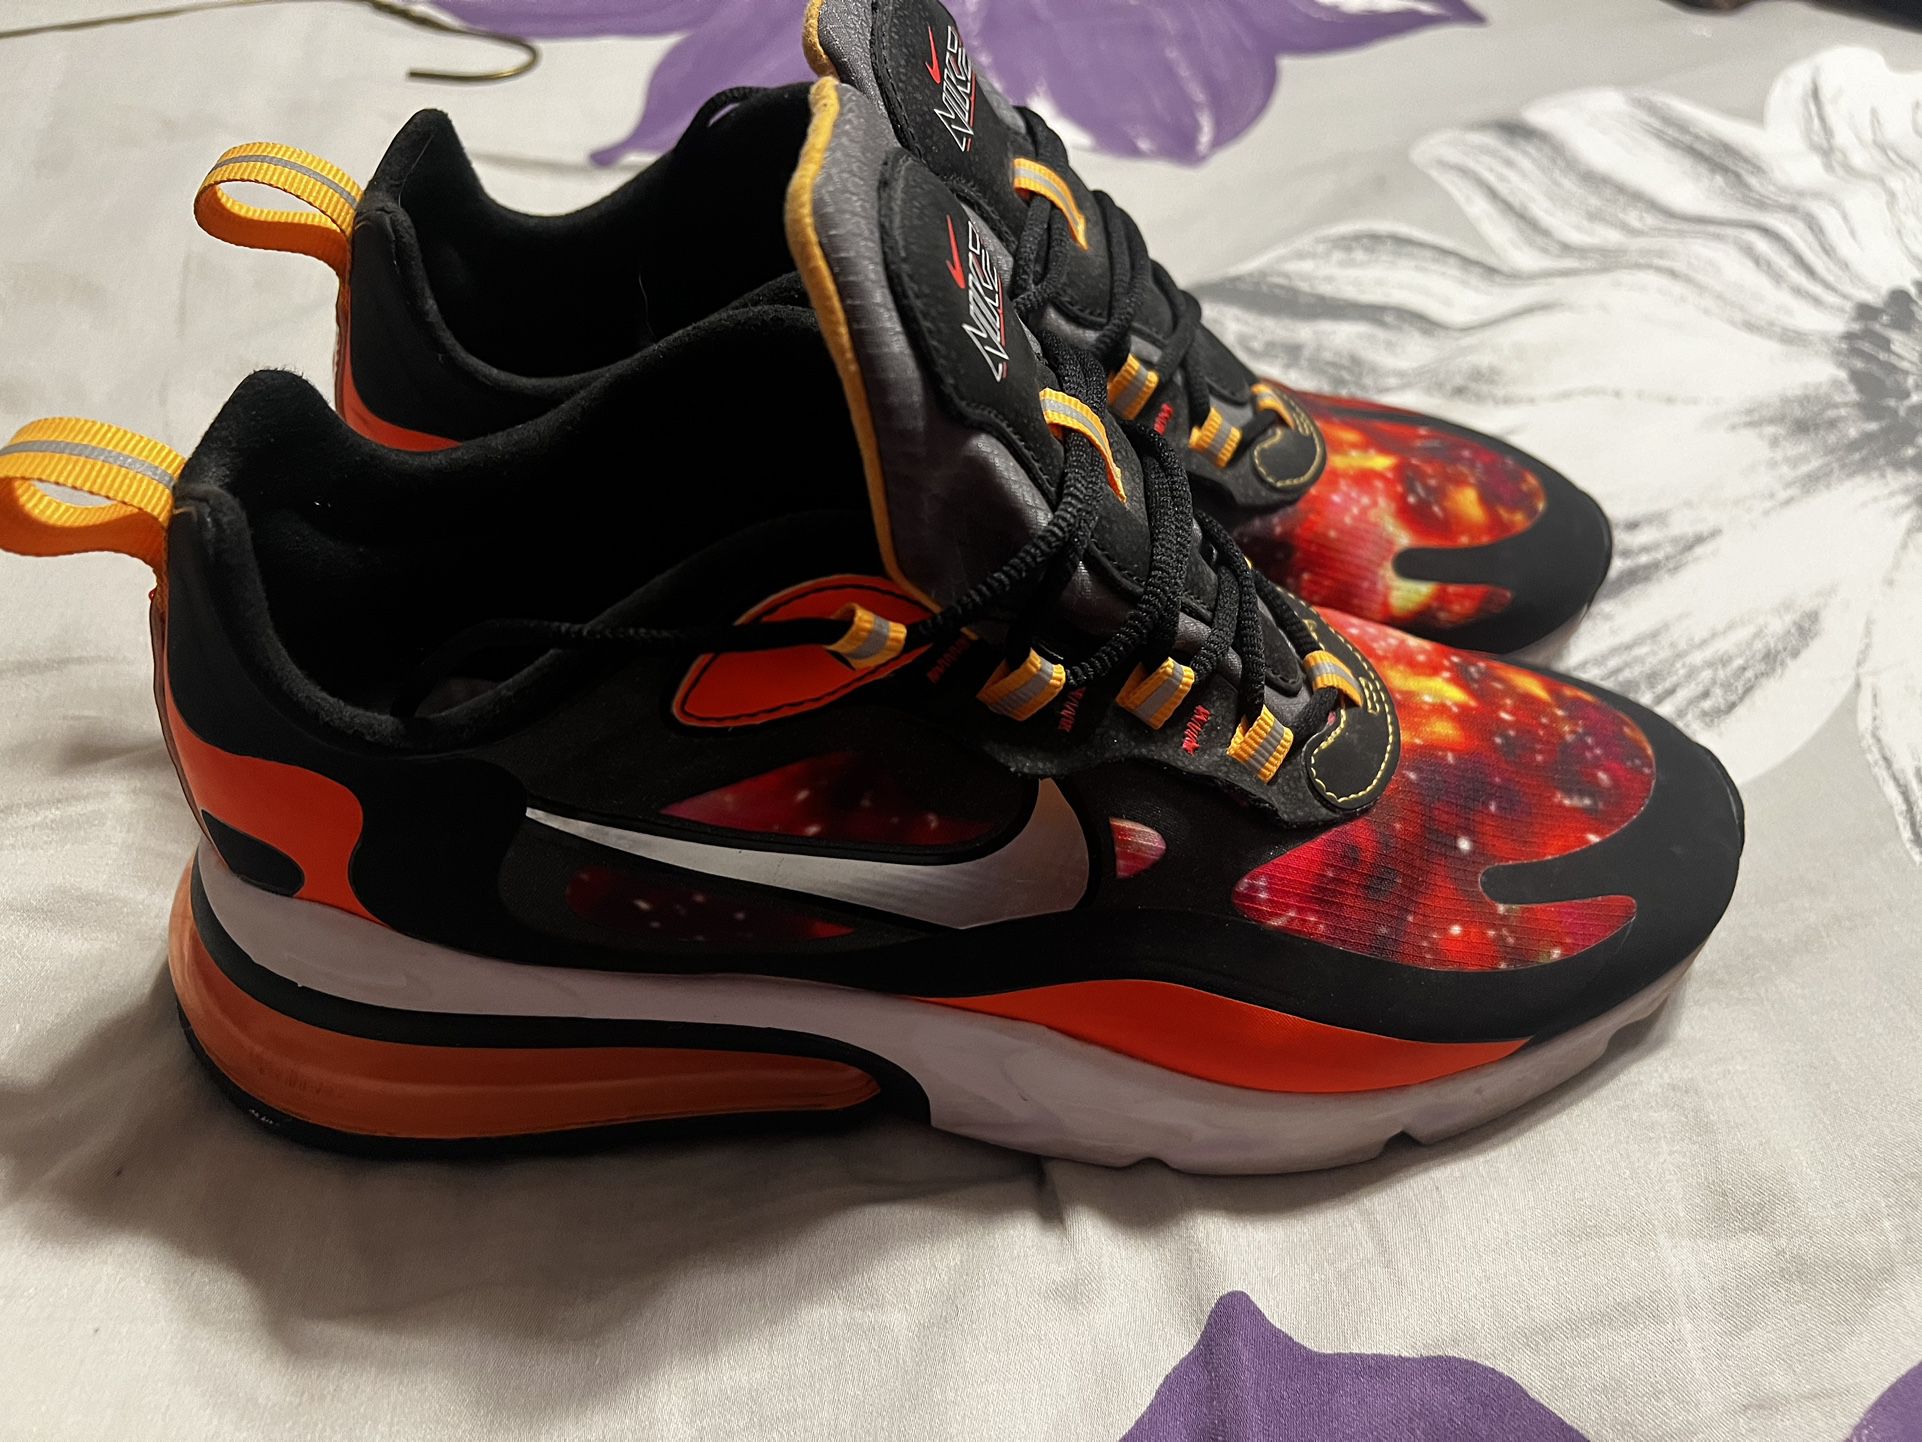 Nike Air Max 270 React Supernova 2020 Running Shoes/Sneakers Size 9